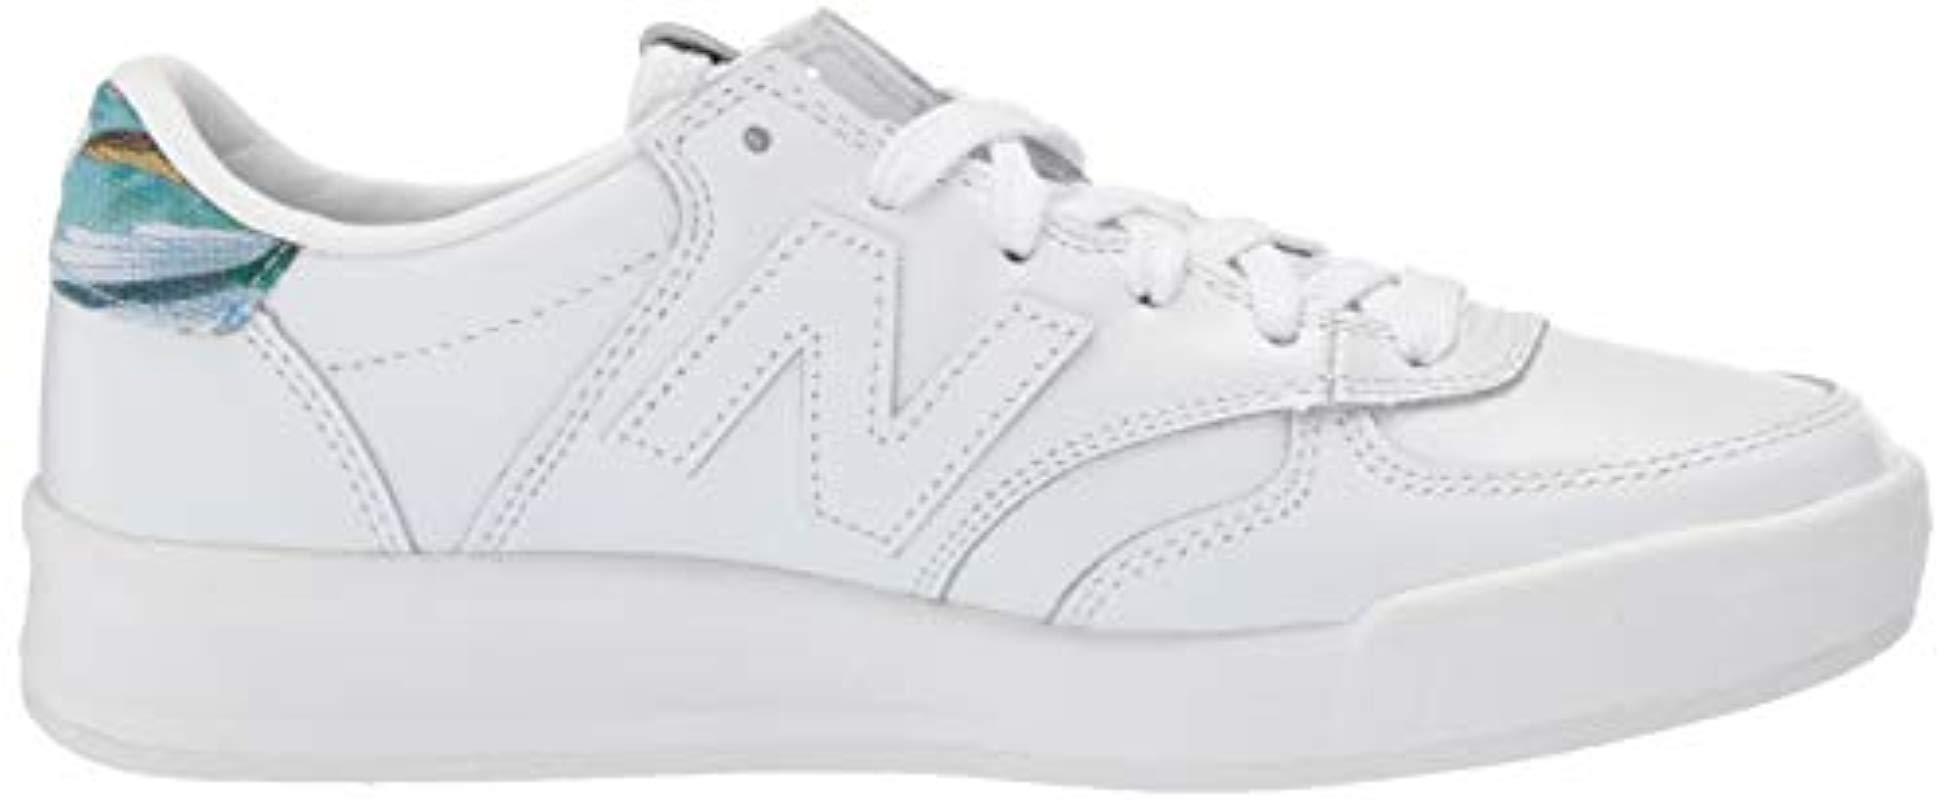 New Balance Canvas 300 V1 Court Sneaker in White/Print (White) - Save 73% |  Lyst